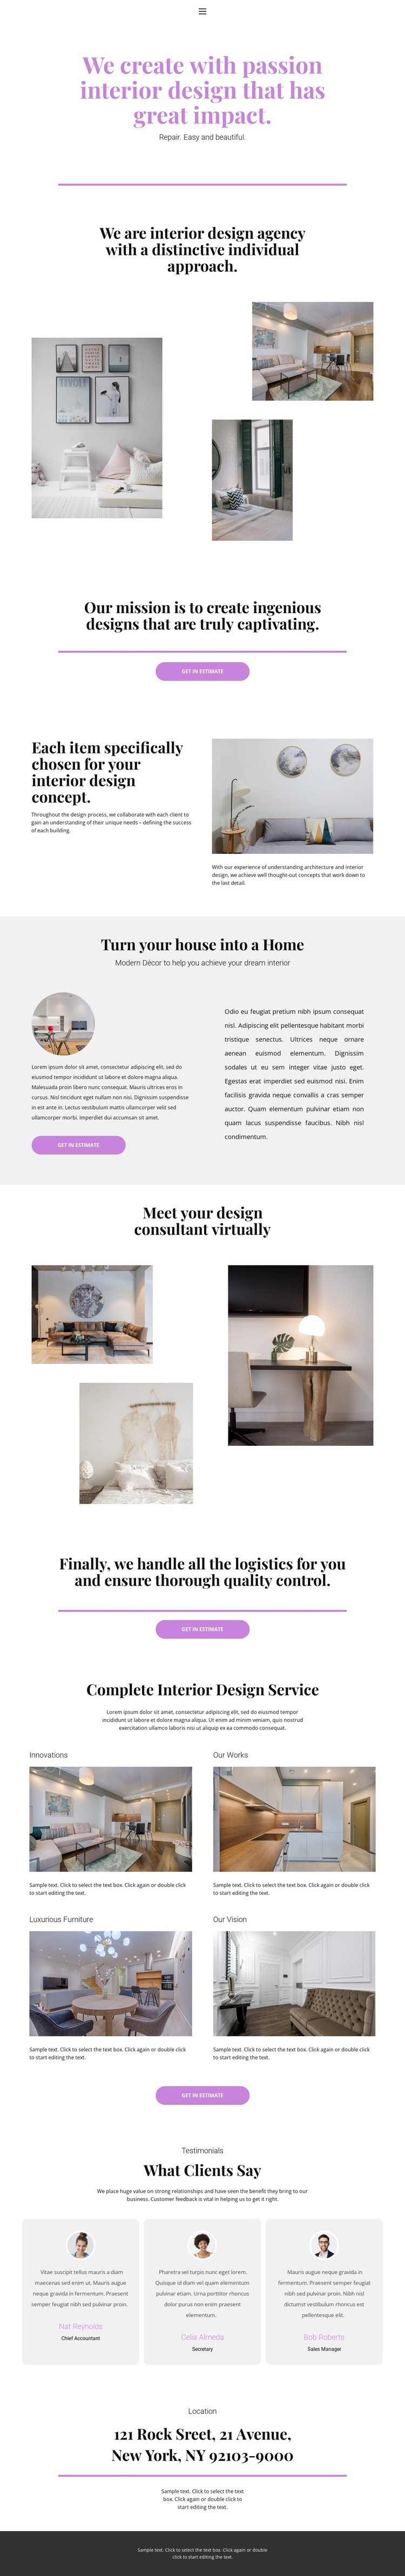 Choice of design for the house Squarespace Template Alternative